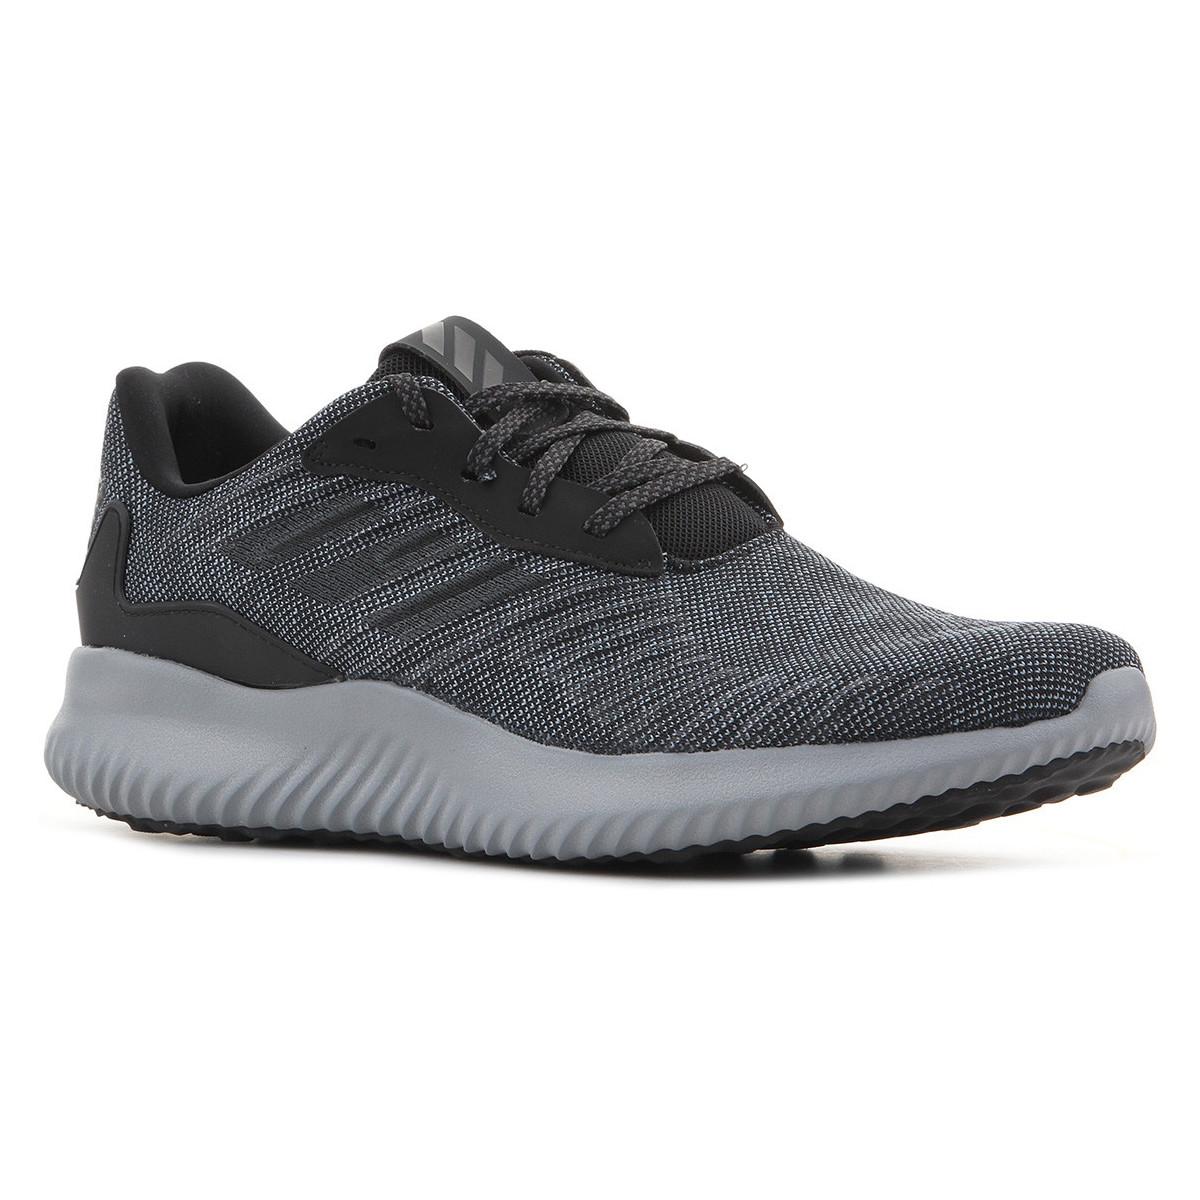 Parity > adidas cg5127, Up to 71% OFF